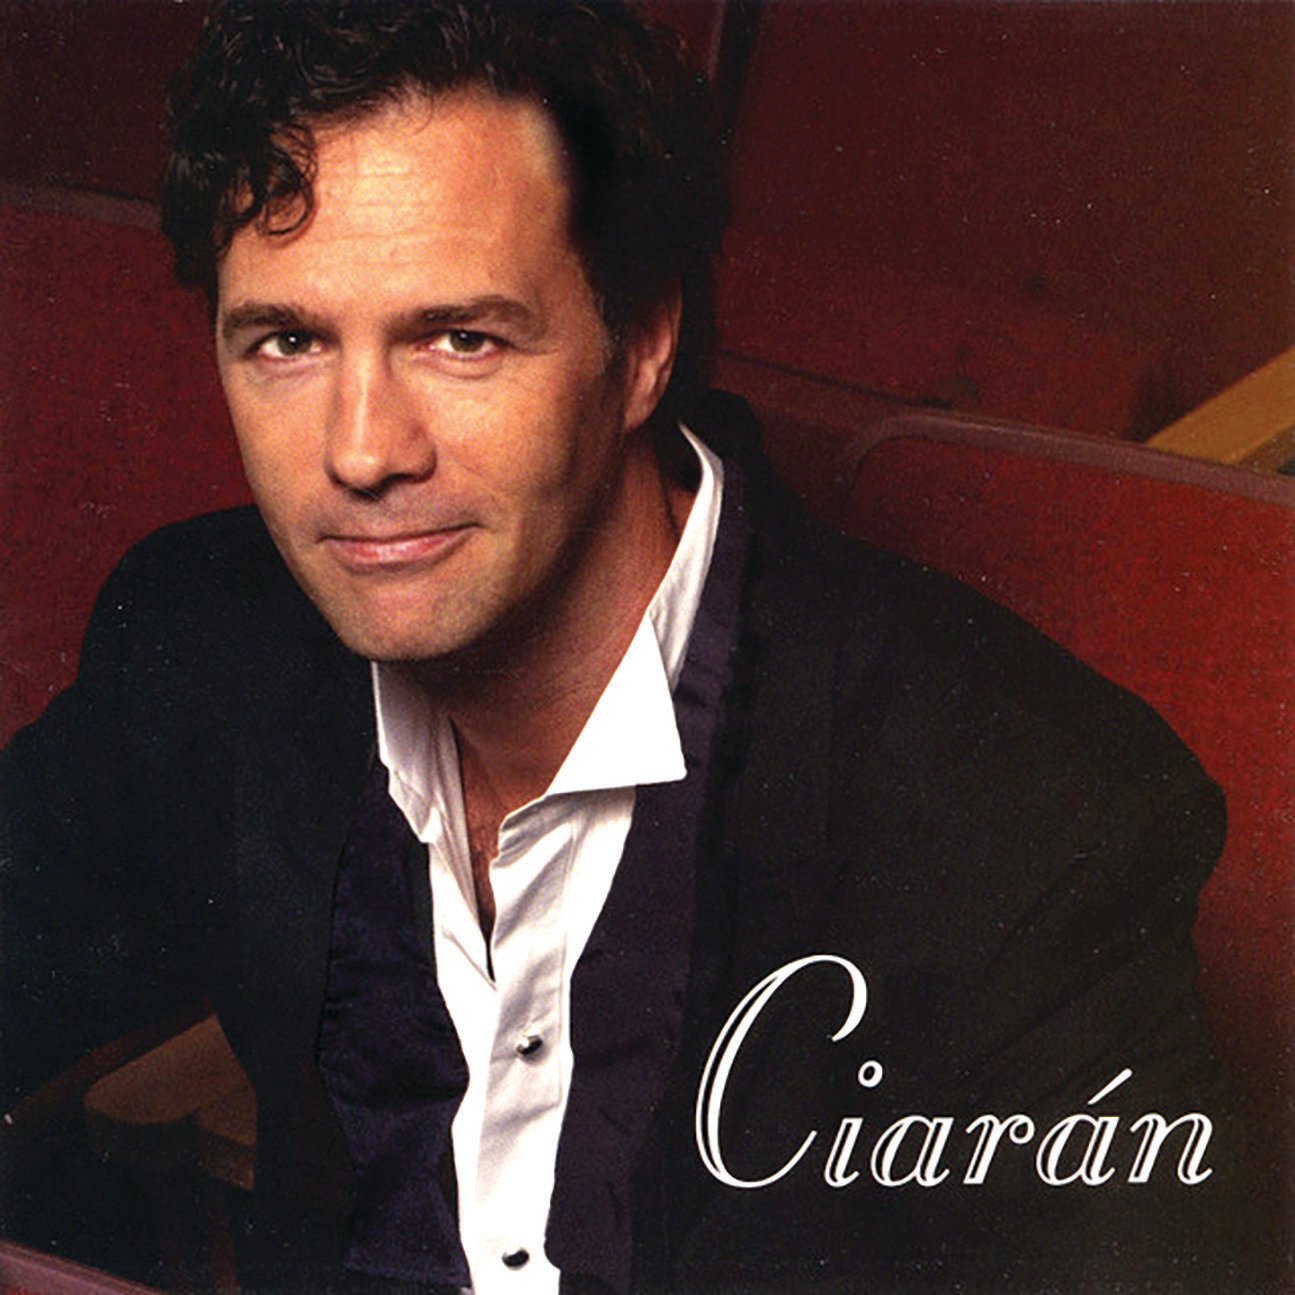 Carousel in Concert stars Broadway actor/singer/producer Ciarán Sheehan.